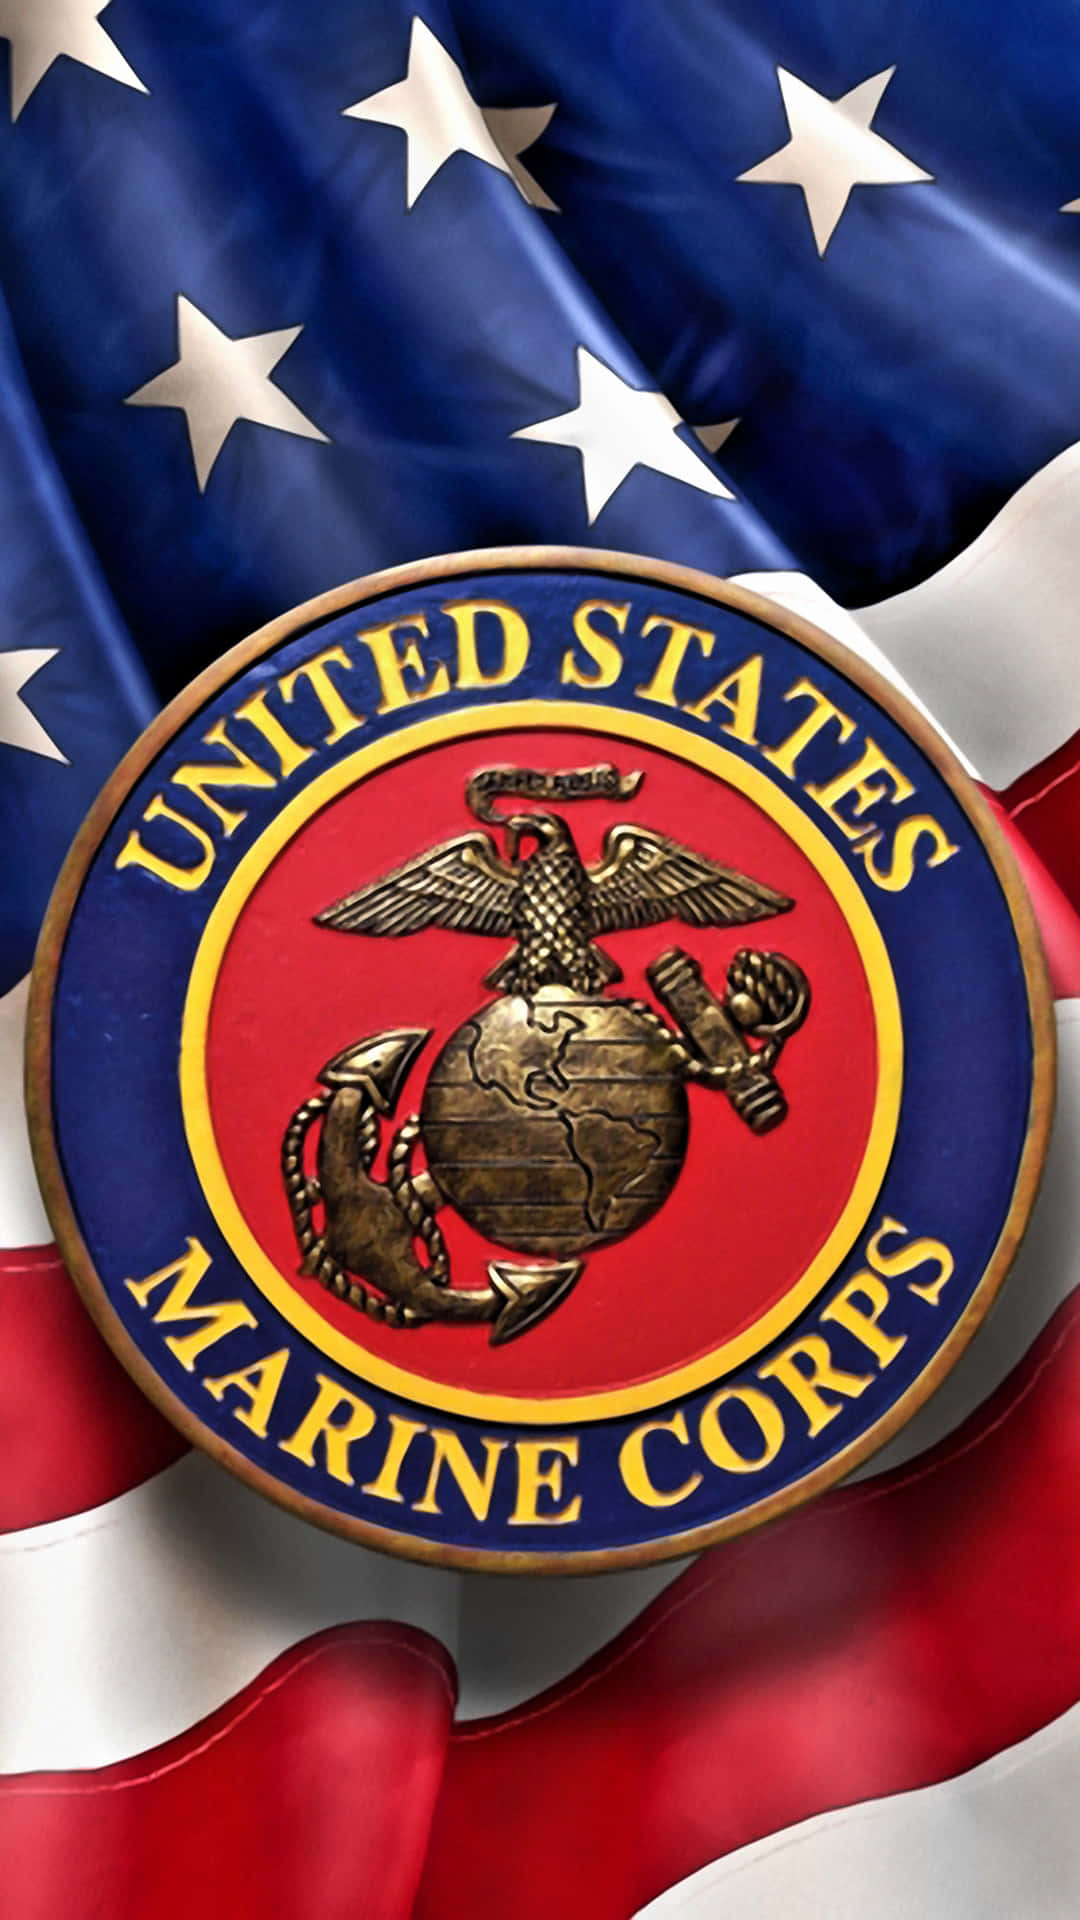 Marine Corps iPhone Wallpaper by thewill on deviantART  Marine corps Usmc  wallpaper Usmc quotes